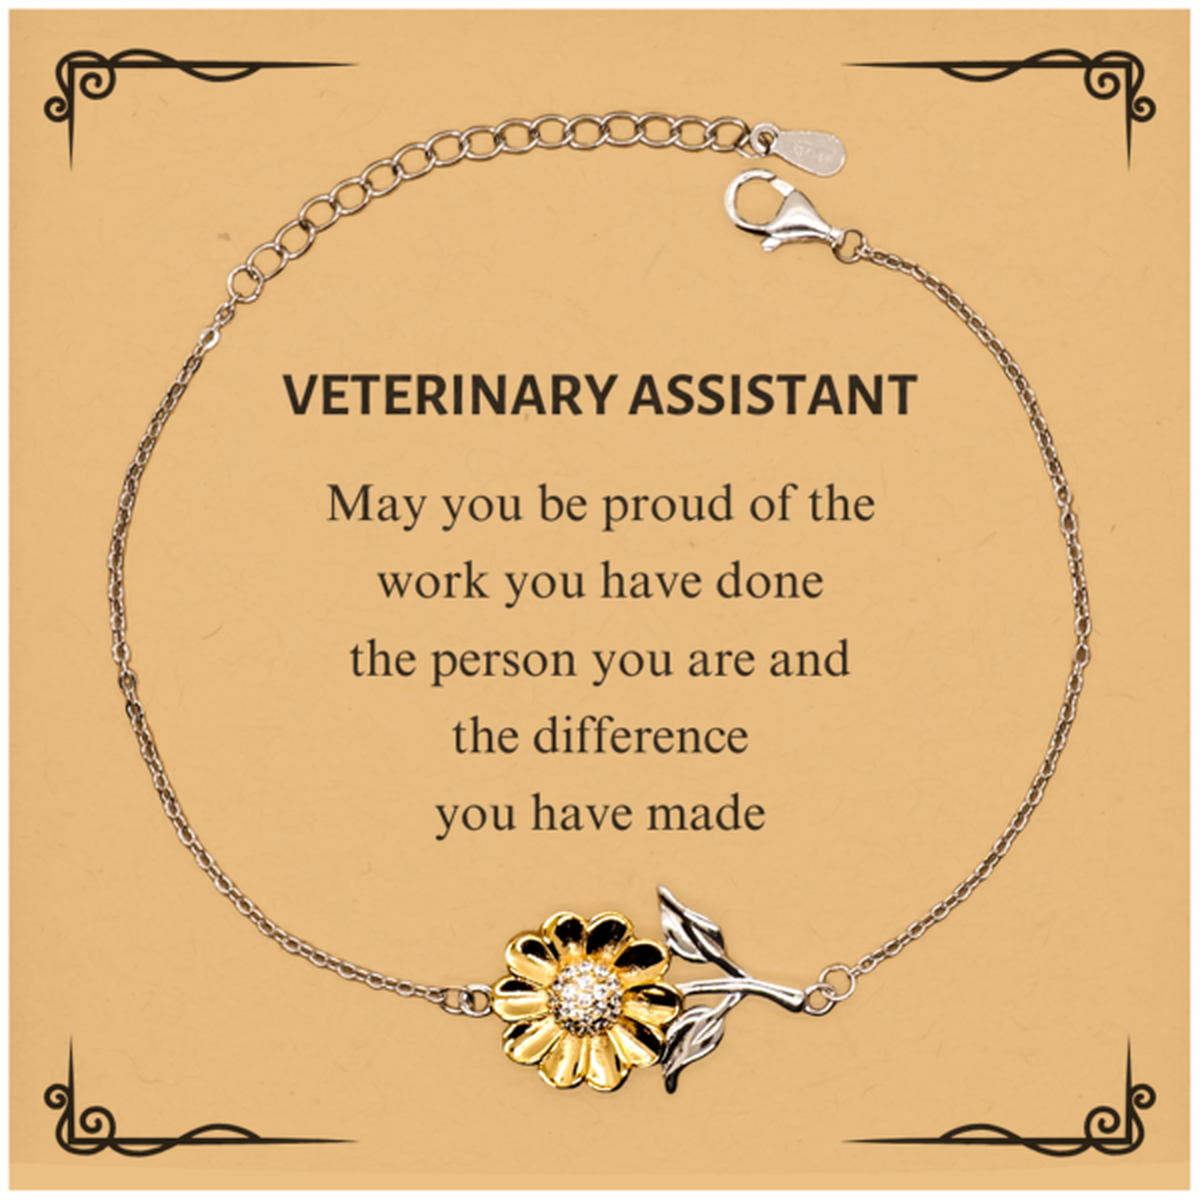 Veterinary Assistant May you be proud of the work you have done, Retirement Veterinary Assistant Sunflower Bracelet for Colleague Appreciation Gifts Amazing for Veterinary Assistant